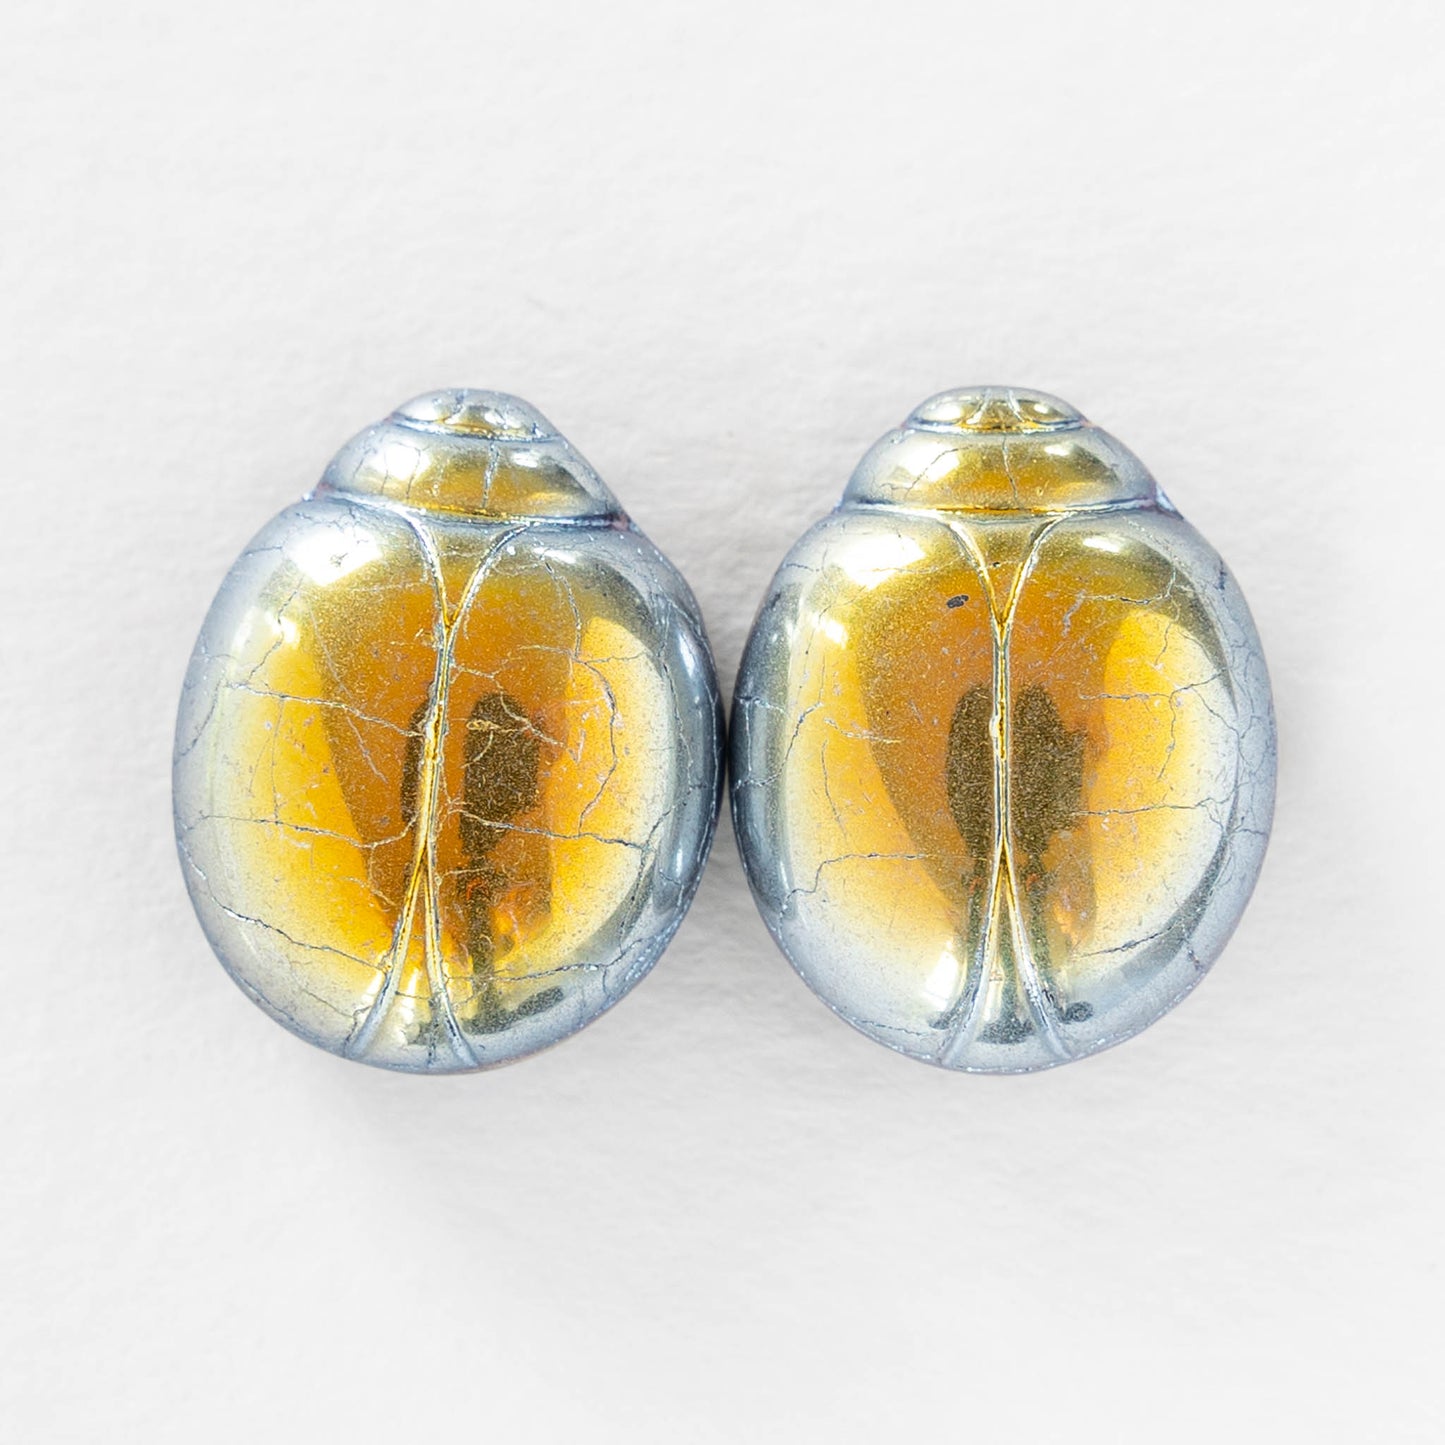 Metallic Scarab Beads - Two Hole - Silver Gold Marea - 10 beads